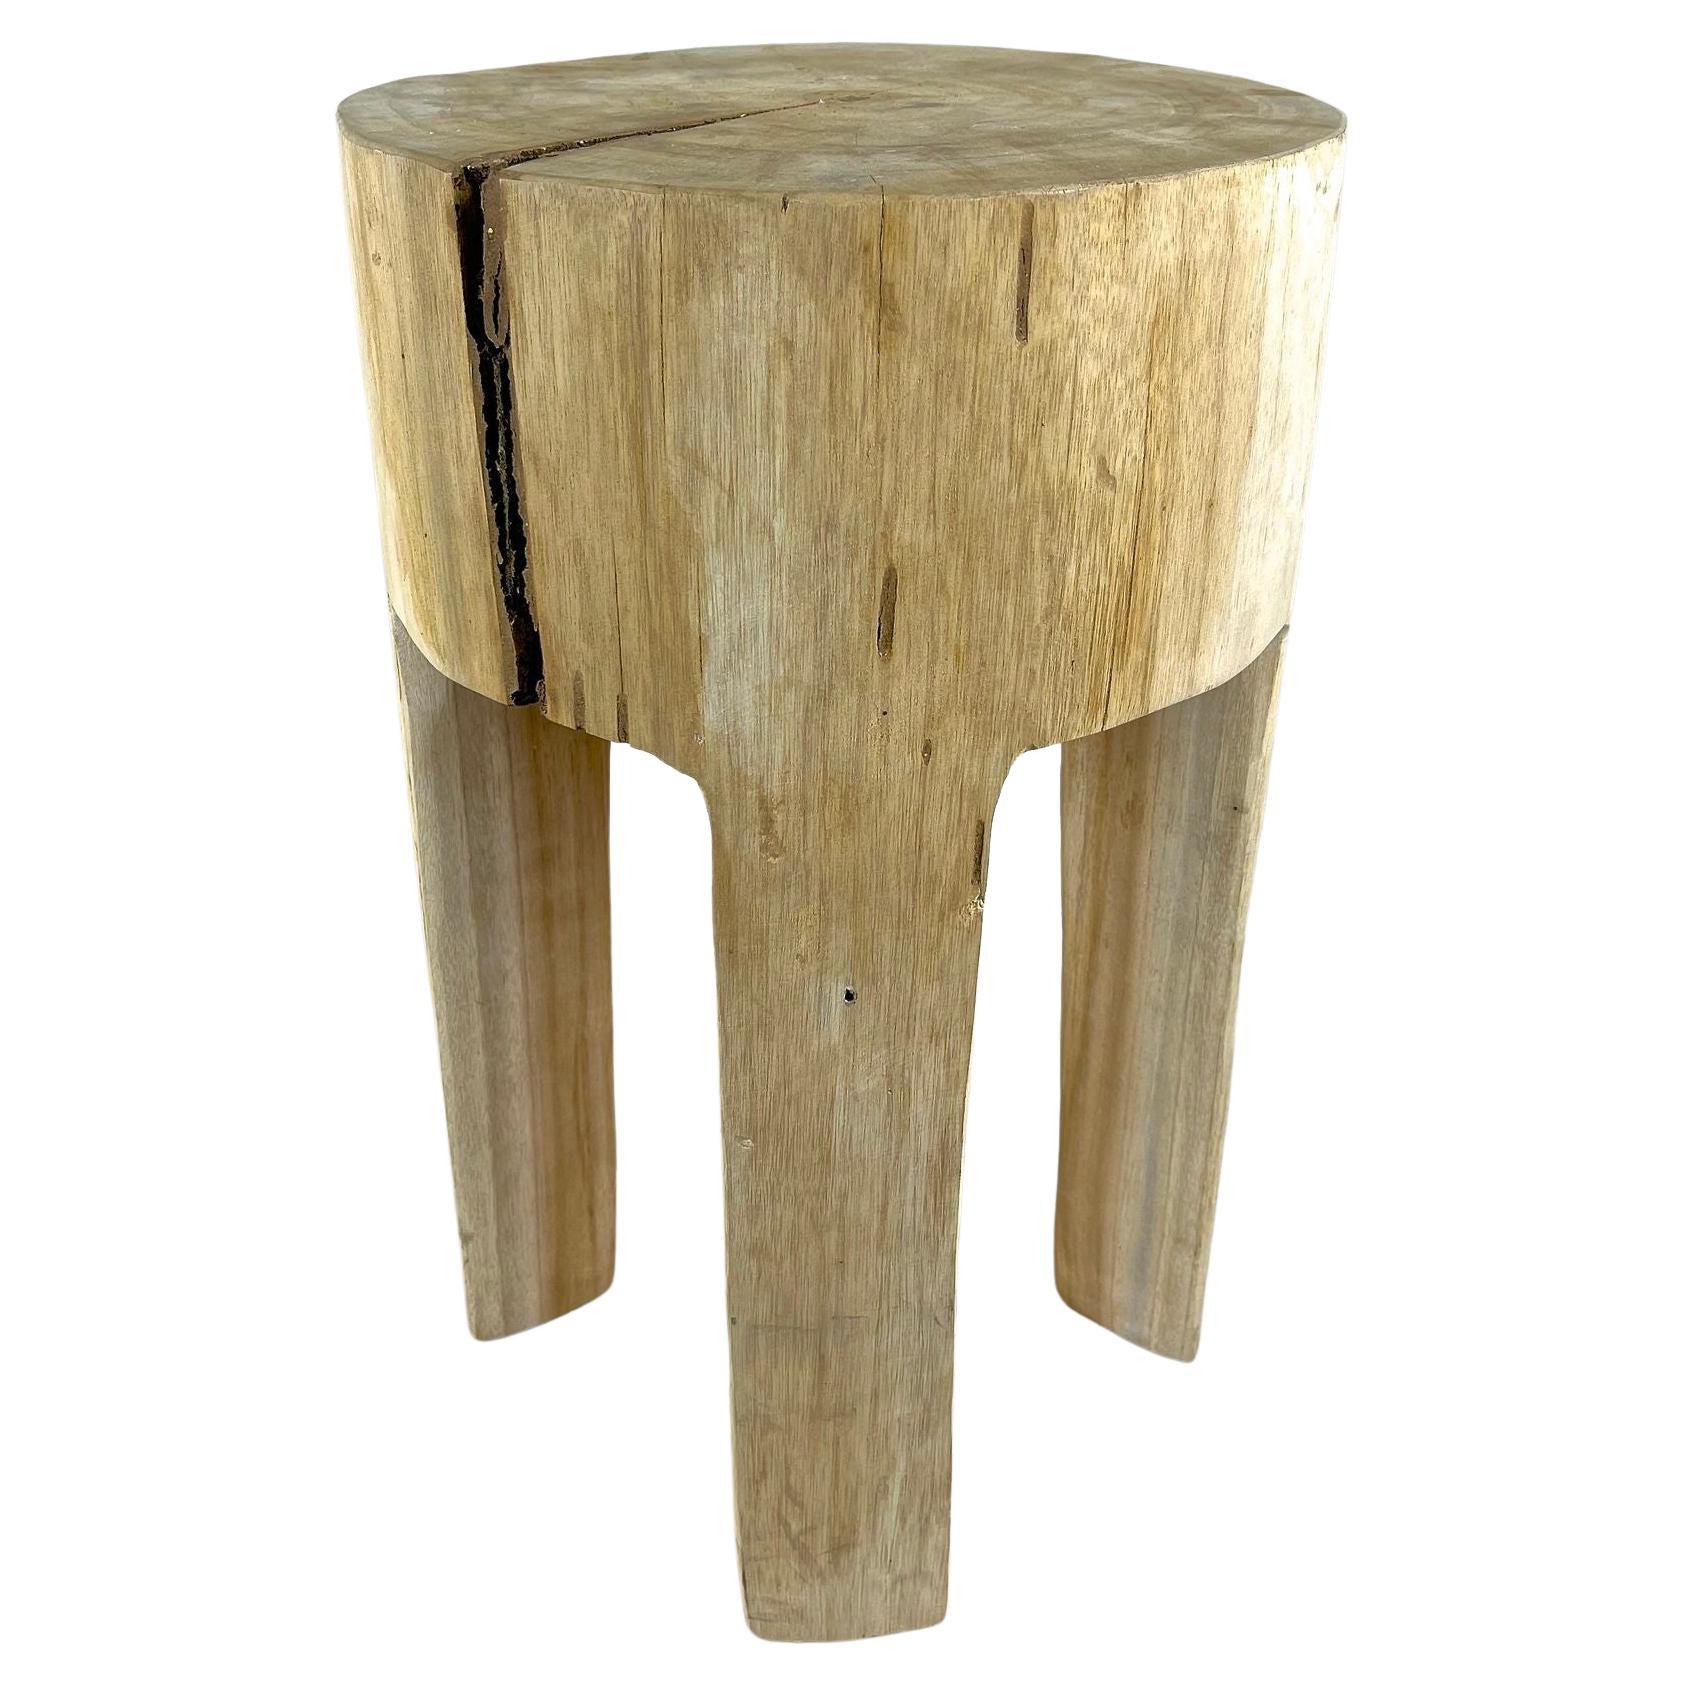 Rustic Handcarved Teak Wood Side Table/ Stool, Bleached, IDN 2024 For Sale